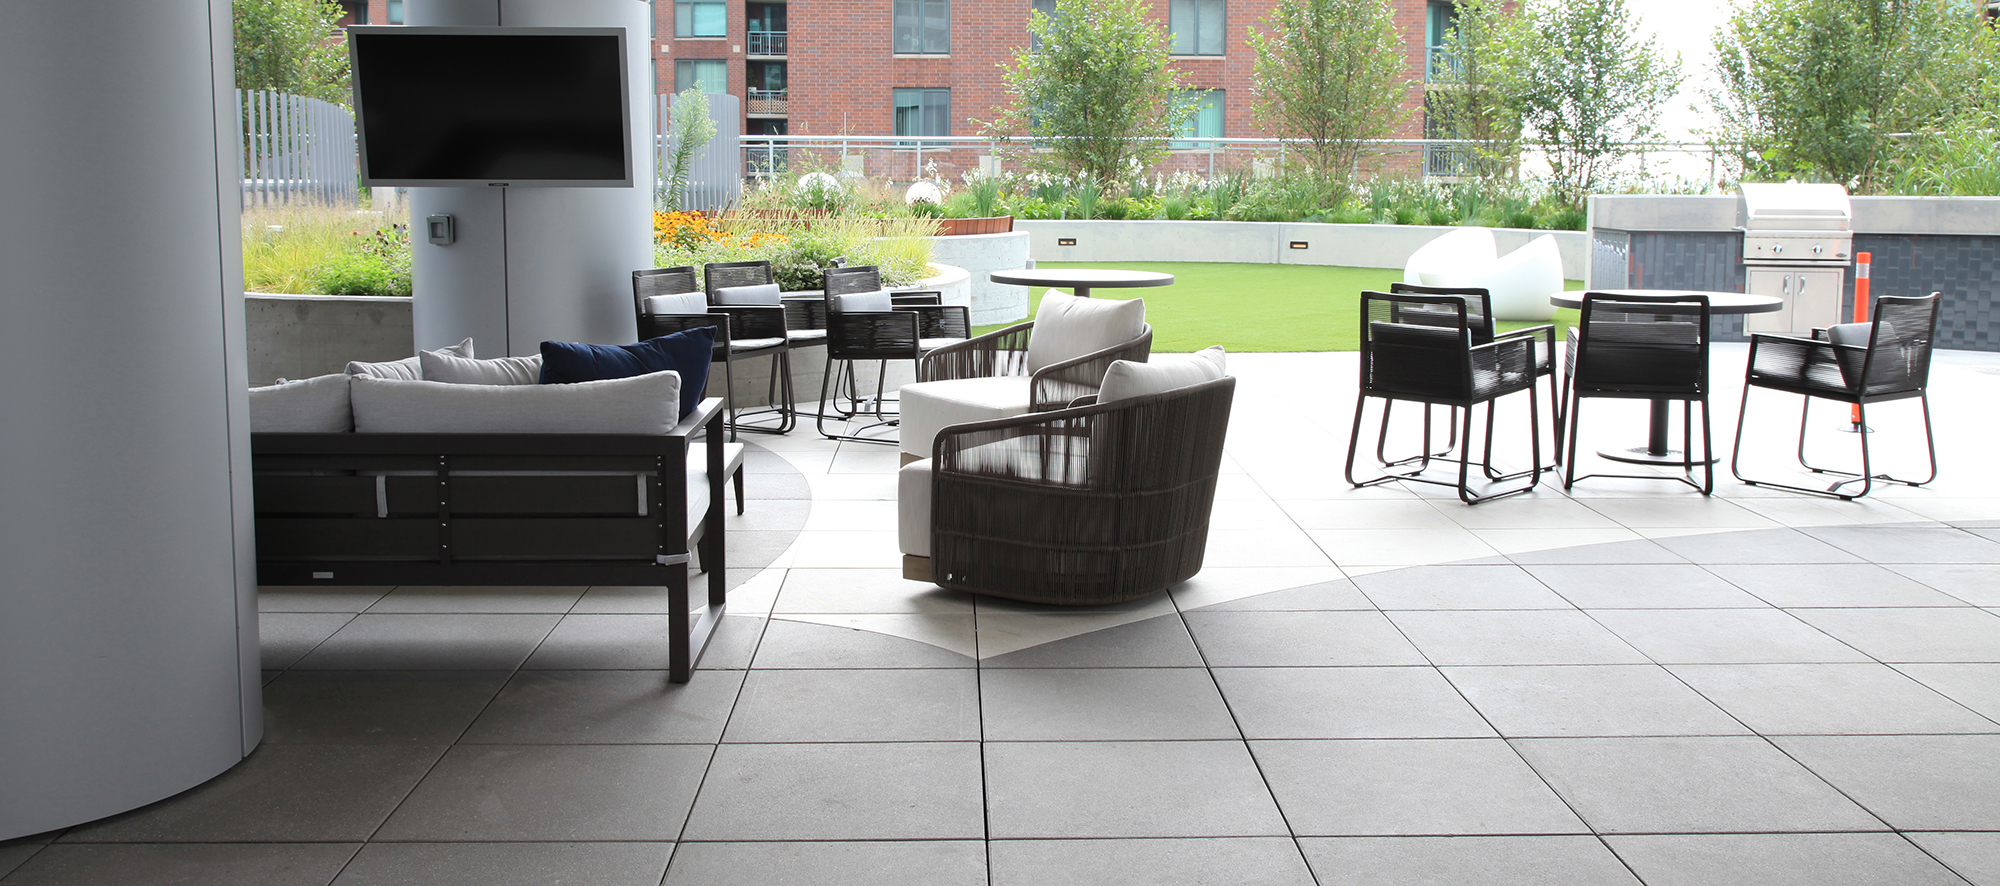 An outdoor living room with a TV and BBQ area on a circular themed roof deck created with Unilock Arcana slabs in white and grey.